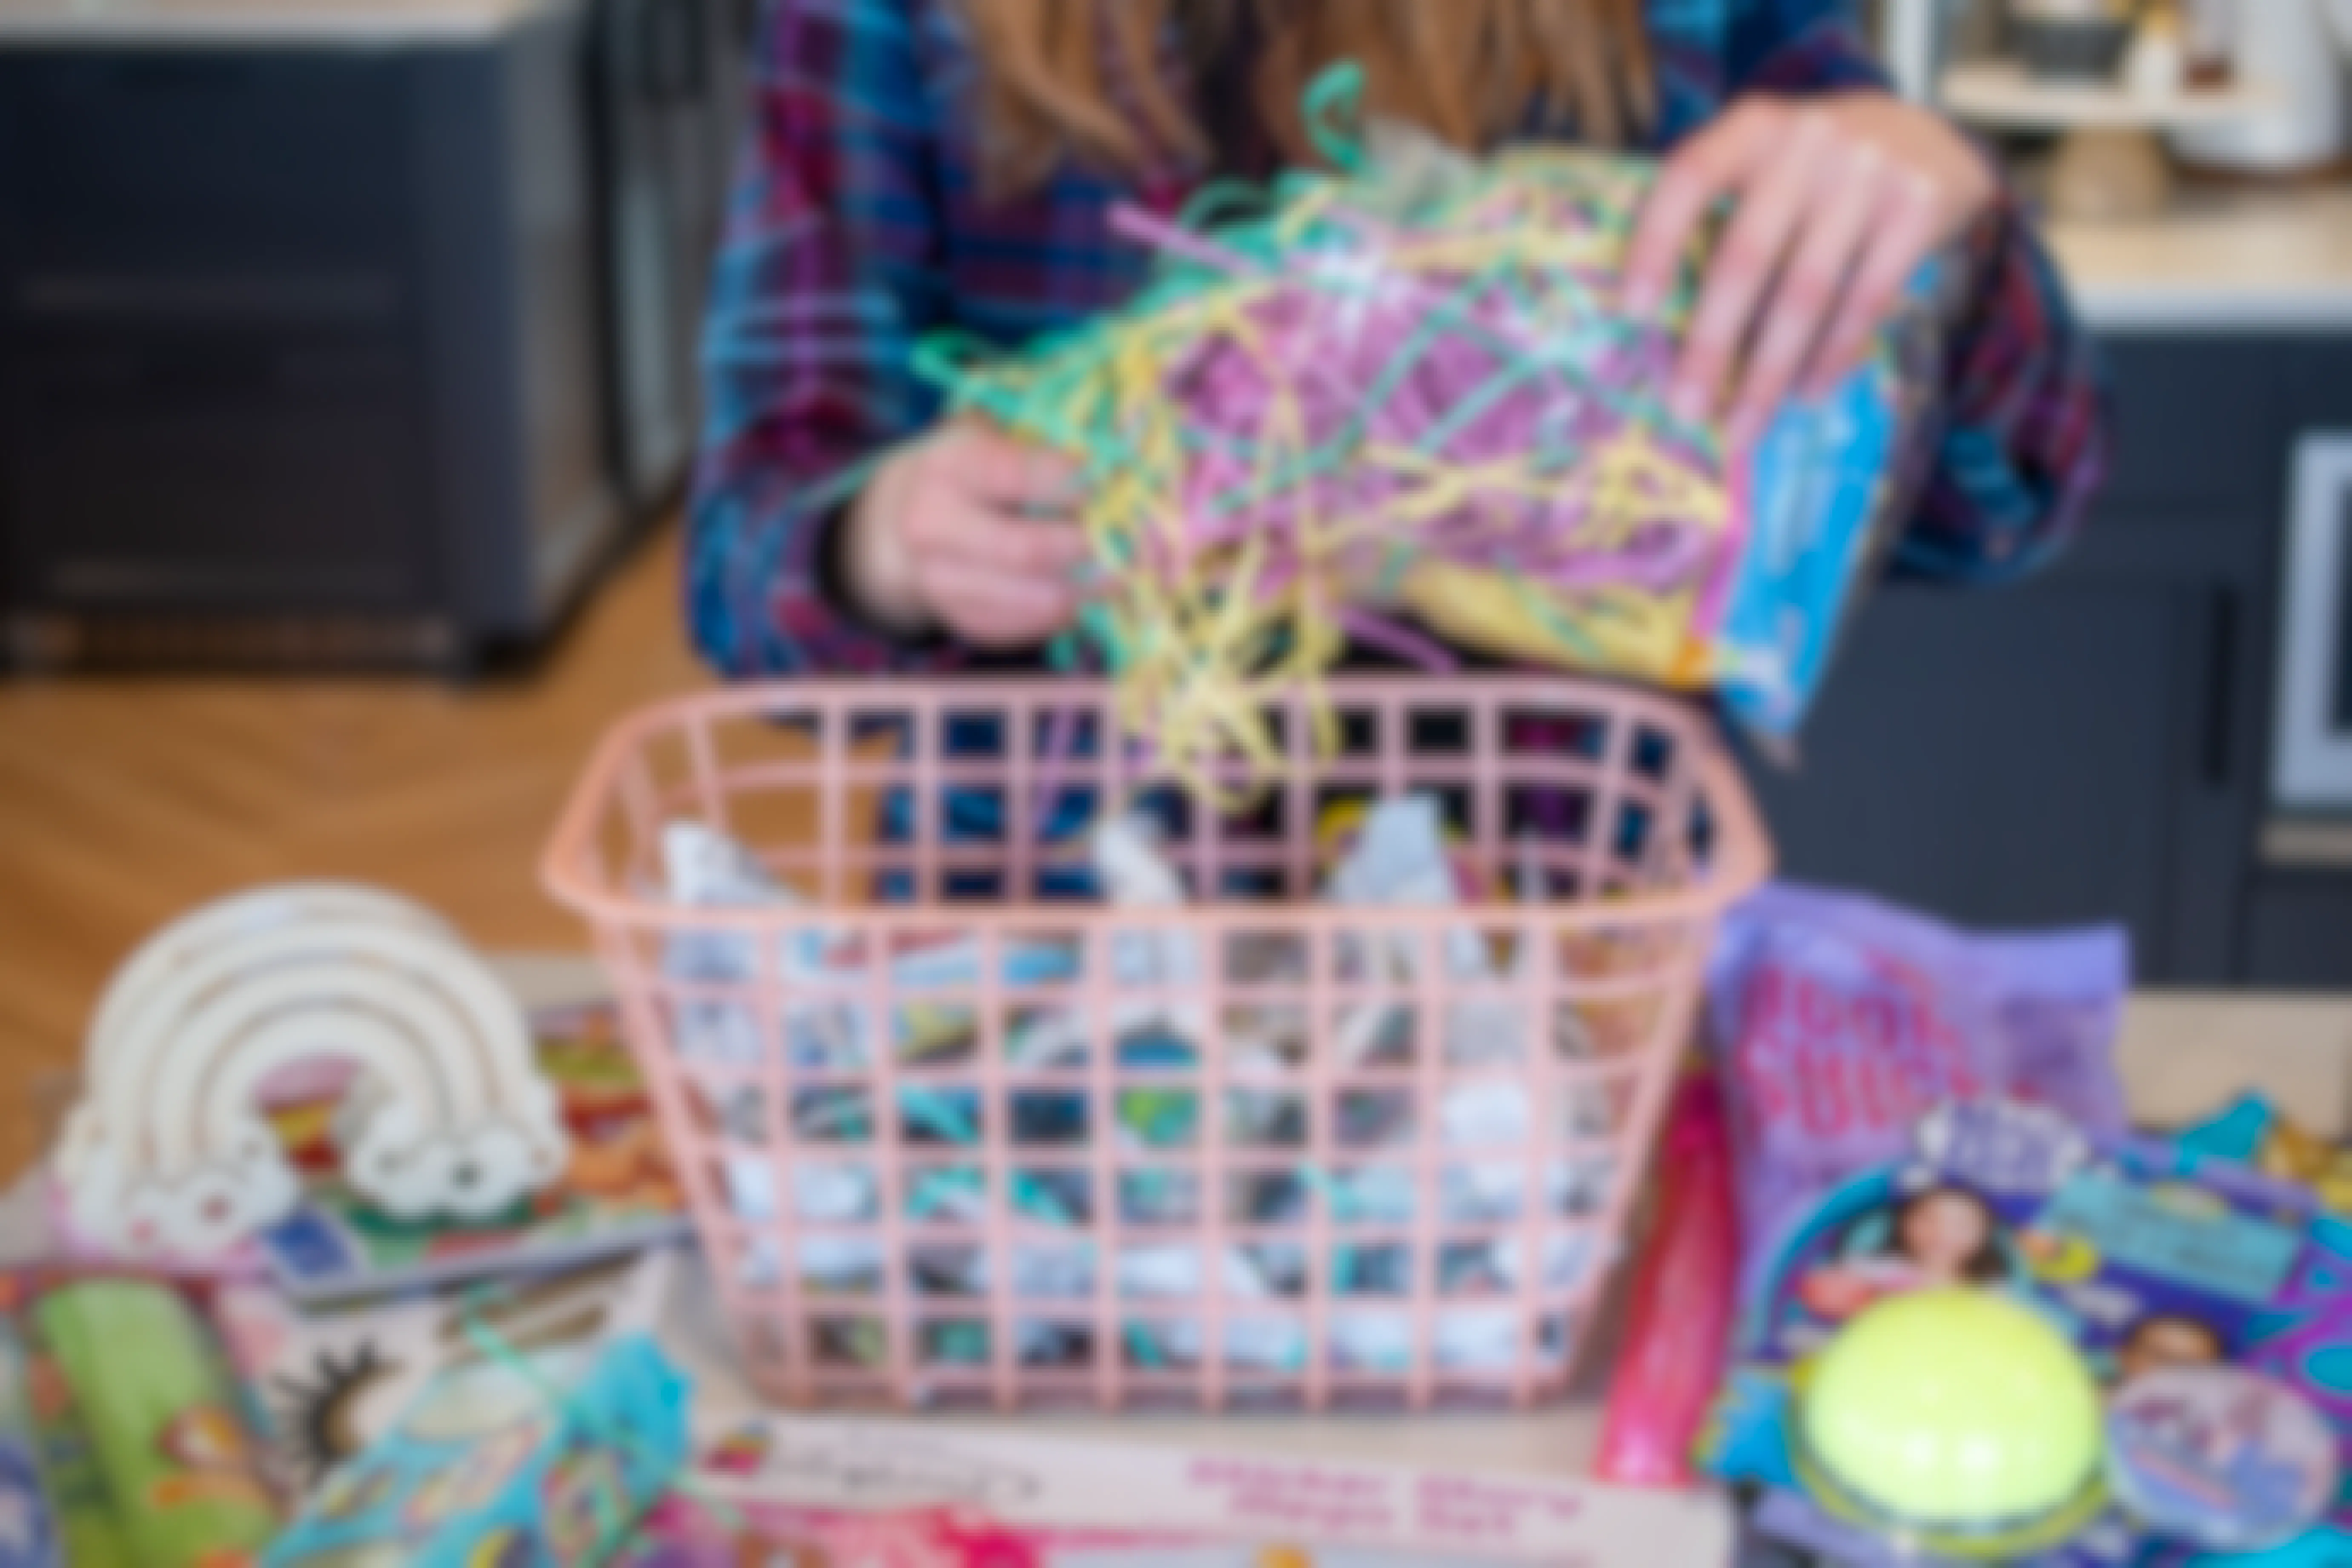 Toys and items are on the counter surrounding a pink basket. Newspaper is crumpled up inside of the basket and a person is pulling Easter grass from the packaging to put inside the basket.